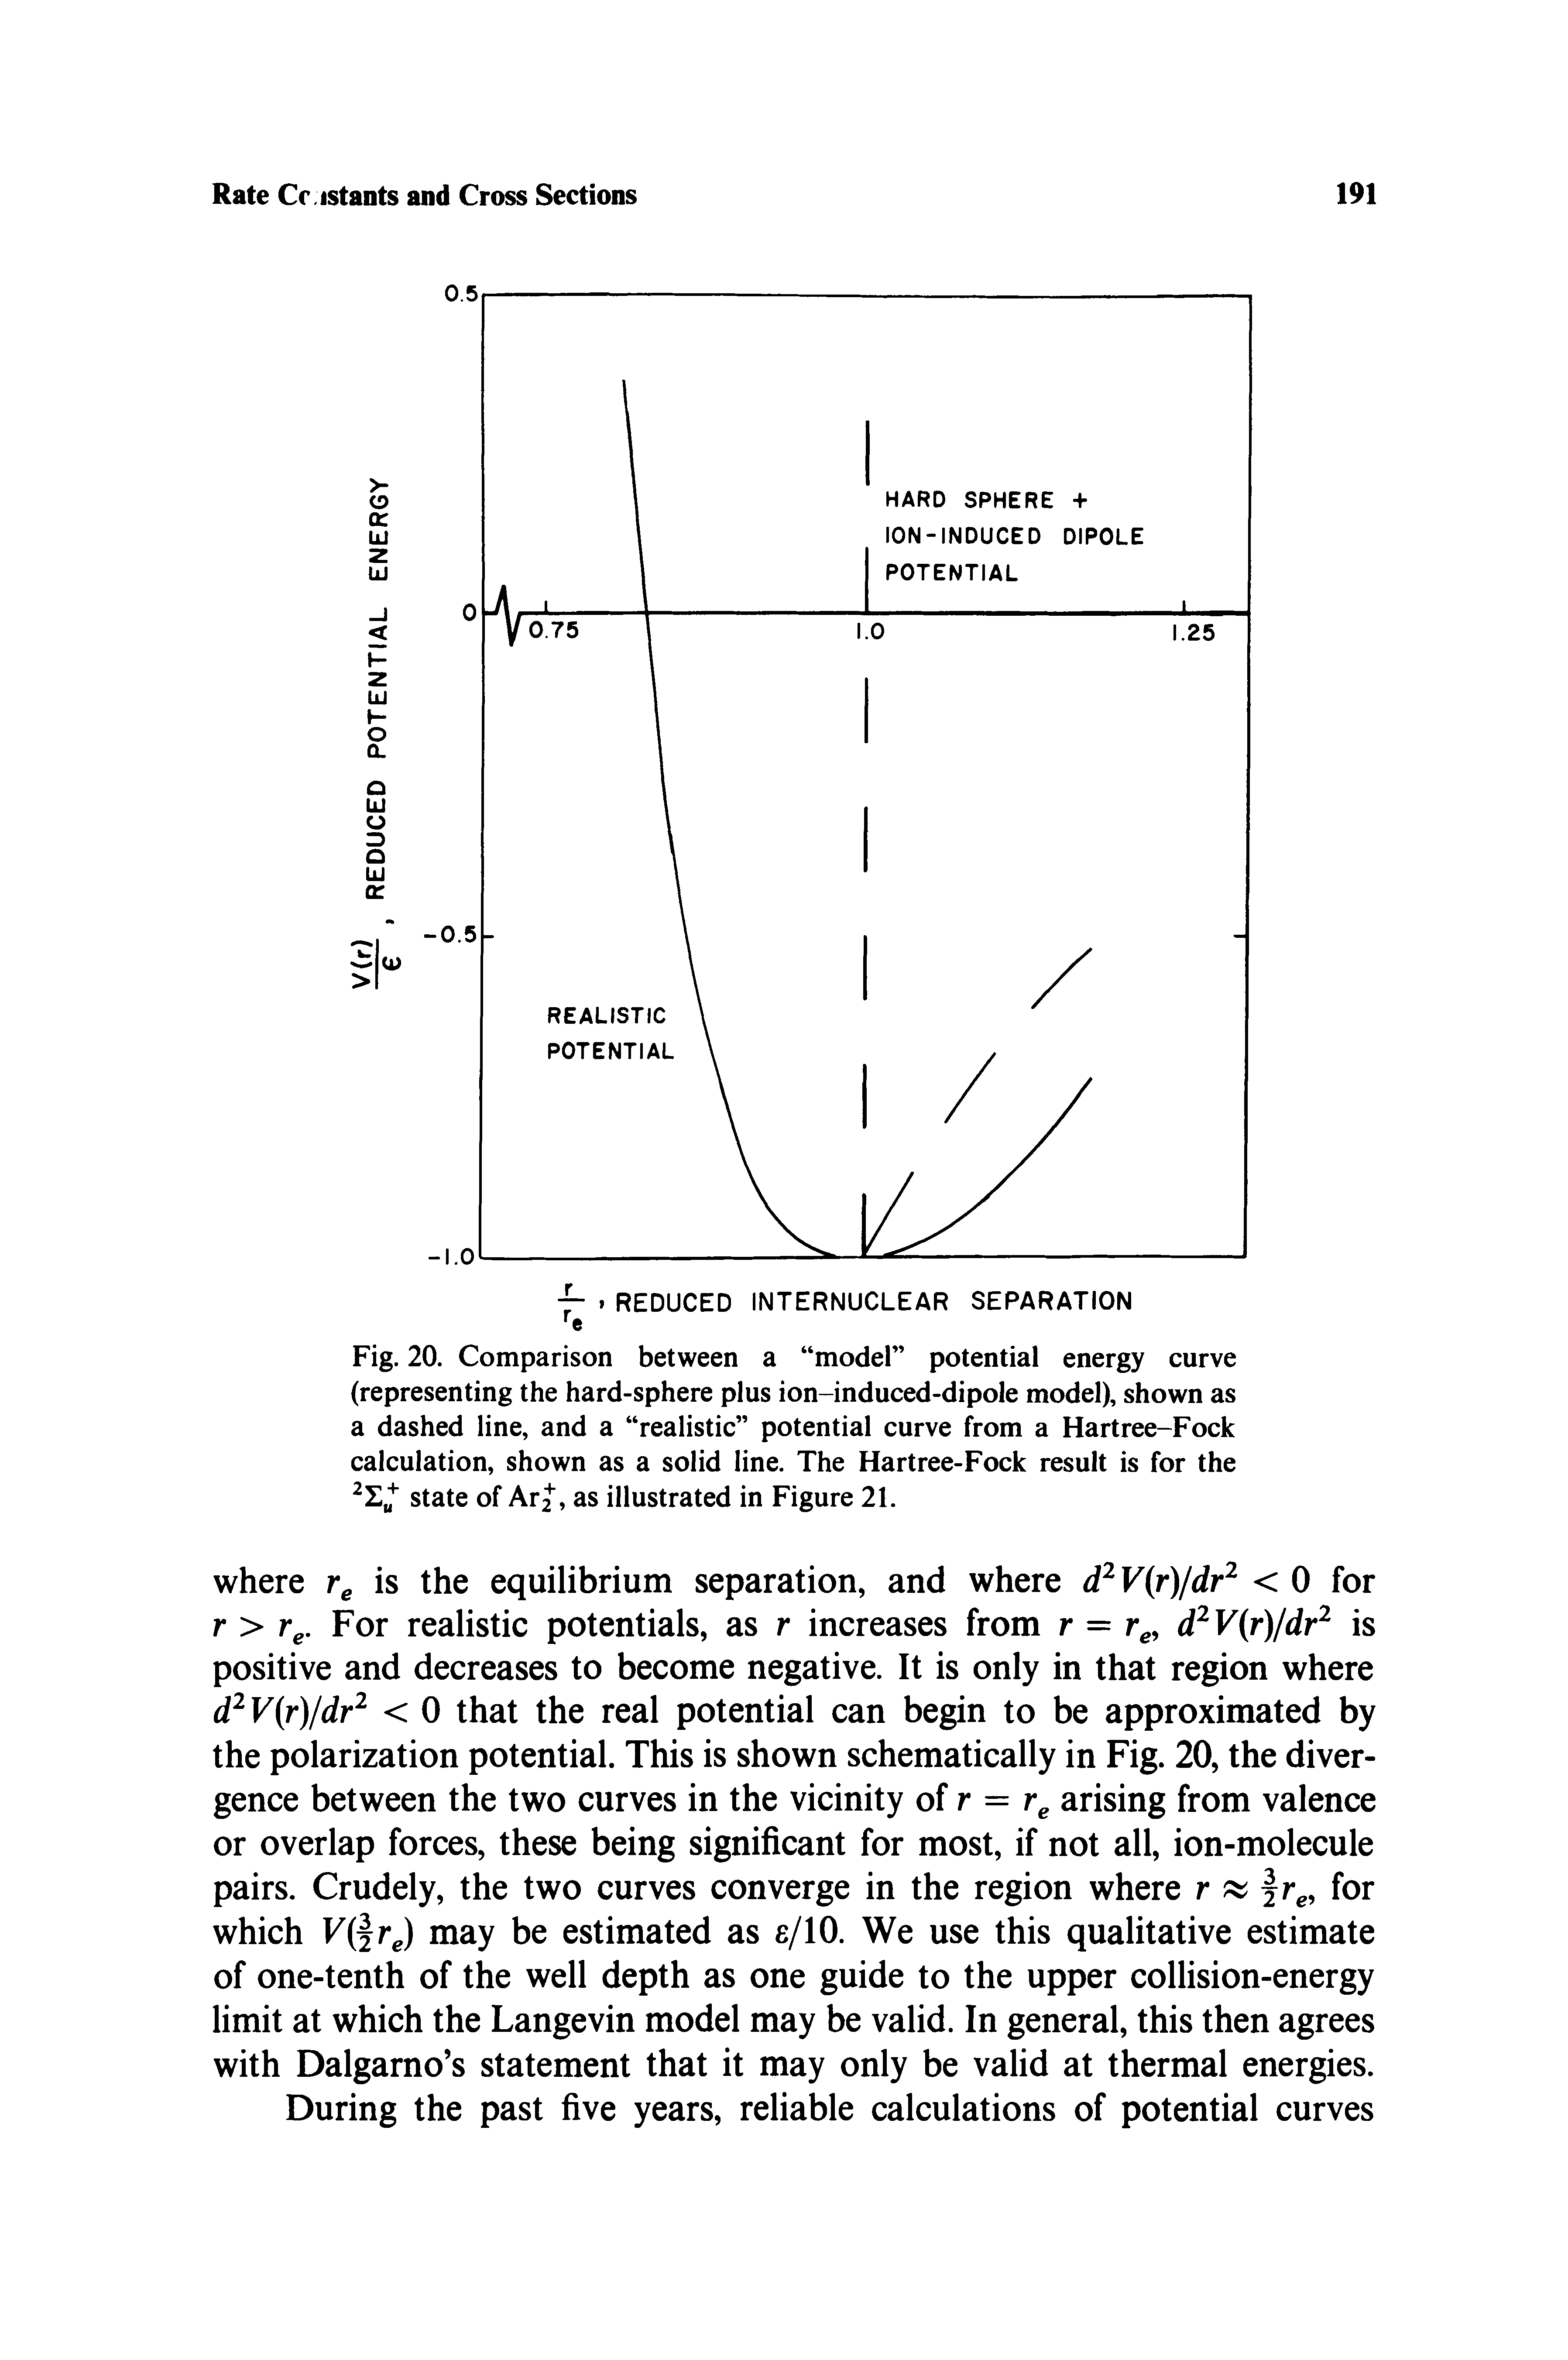 Fig. 20. Comparison between a model potential energy curve (representing the hard-sphere plus ion-induced-dipole model), shown as a dashed line, and a realistic potential curve from a Hartree-Fock calculation, shown as a solid line. The Hartree-Fock result is for the state of ArJ, as illustrated in Figure 21.